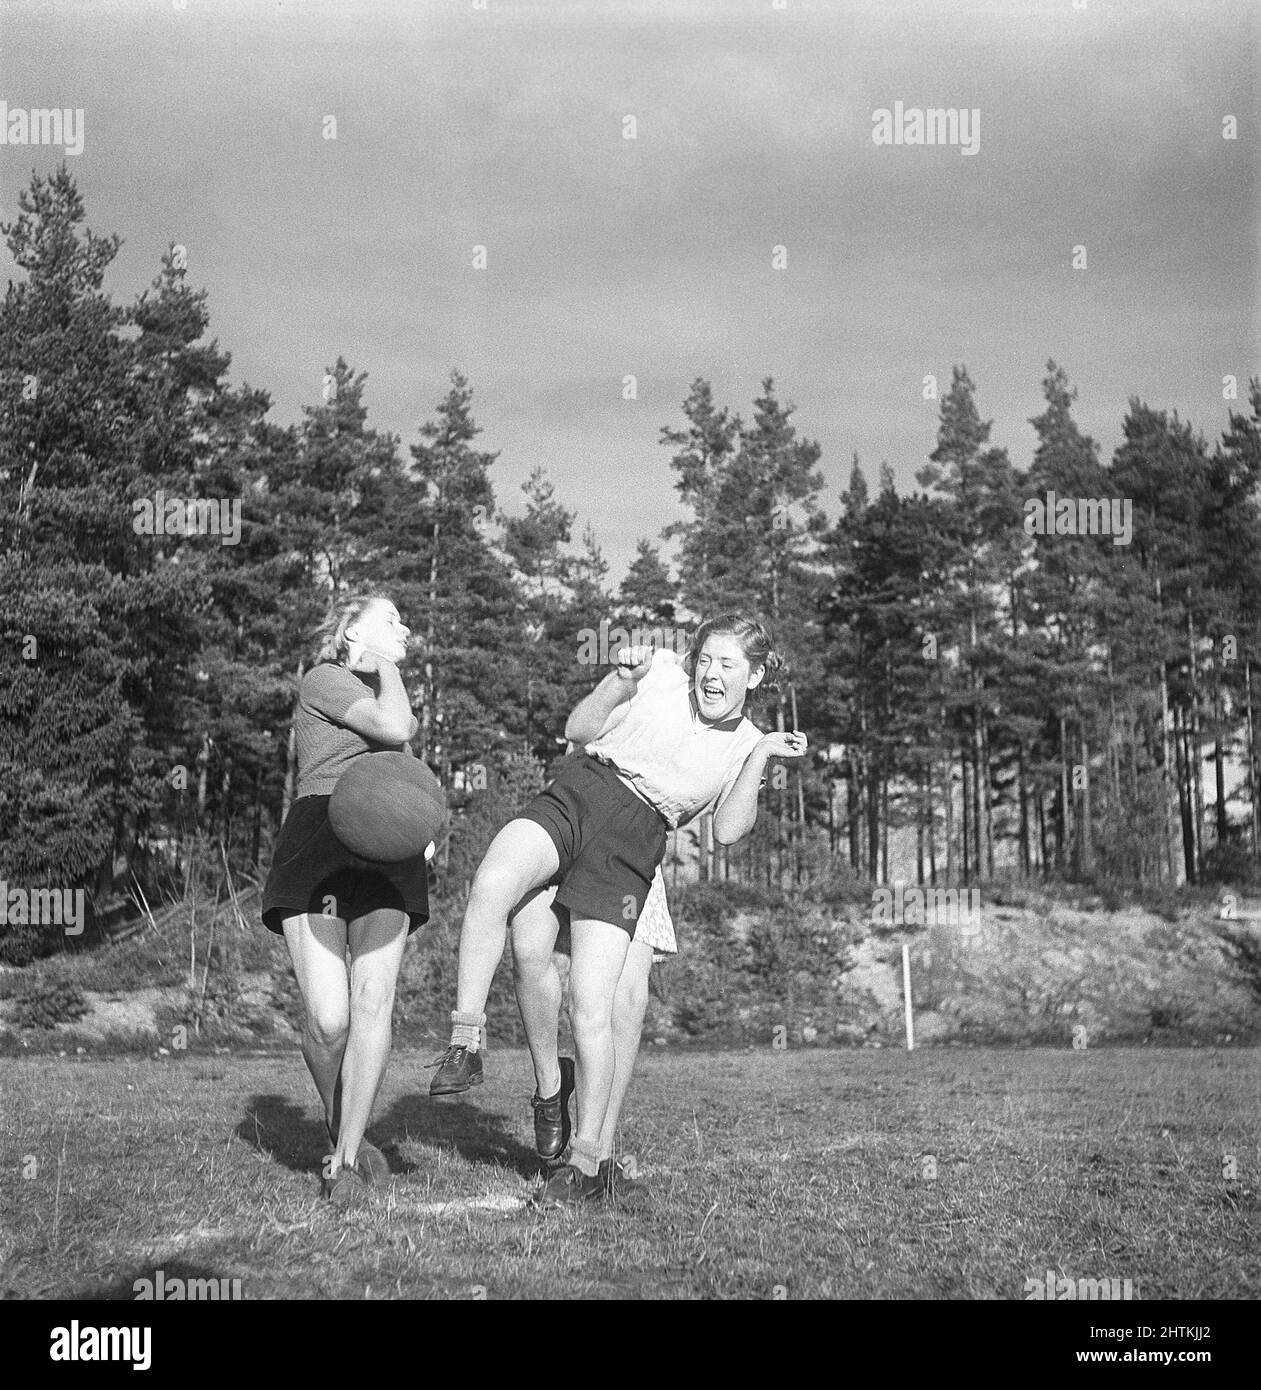 In the 1950s. A women's soccer team during practise. Three players are are fighting for the ball. Sweden 1951 Kristoffersson BE37-1 Stock Photo